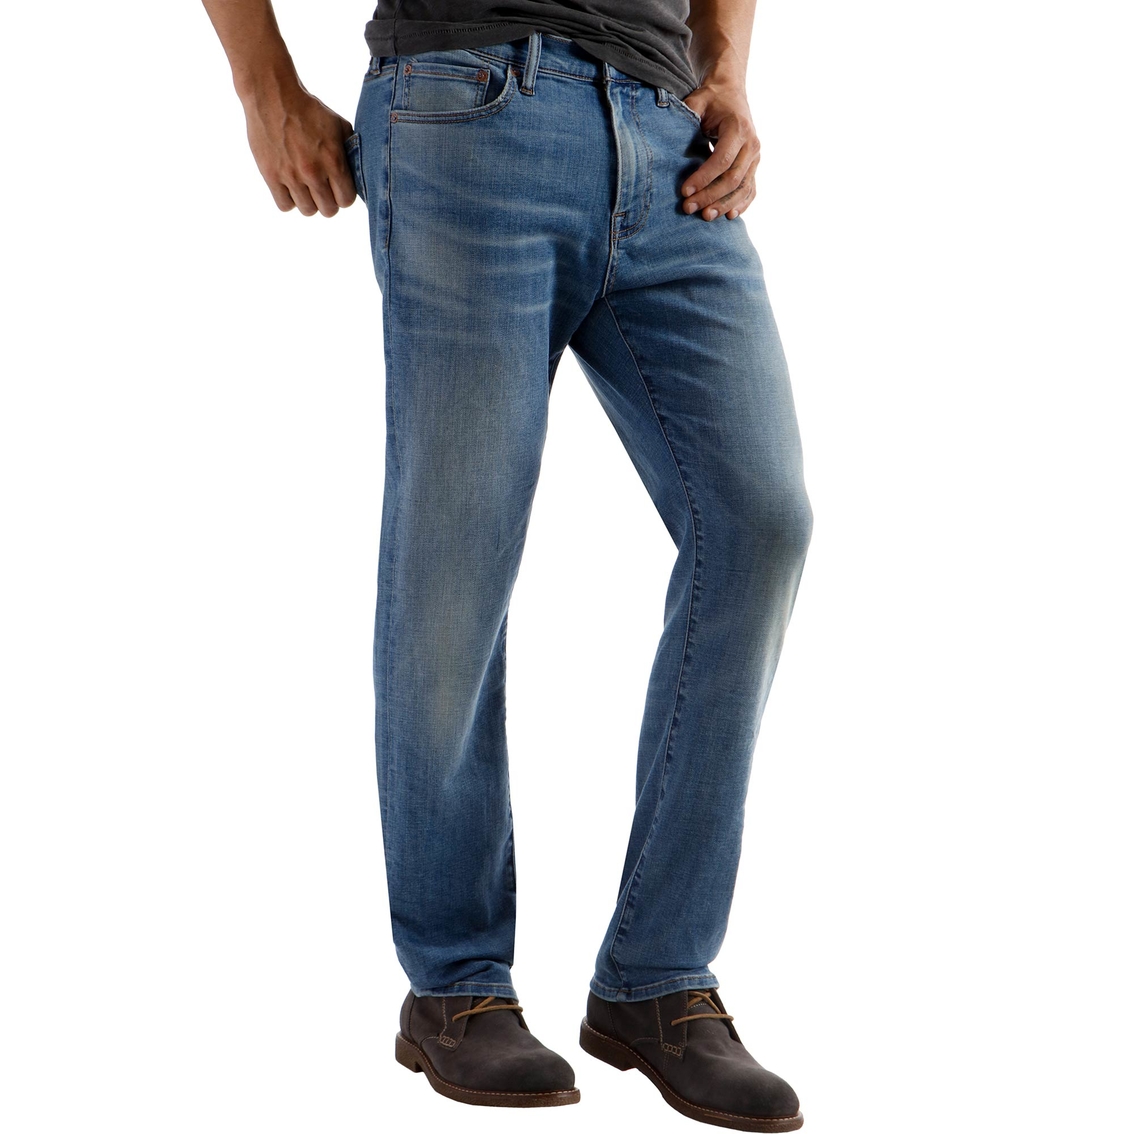 Lucky Brand 410 Athletic Fit Denim Jeans | Jeans | Clothing ...